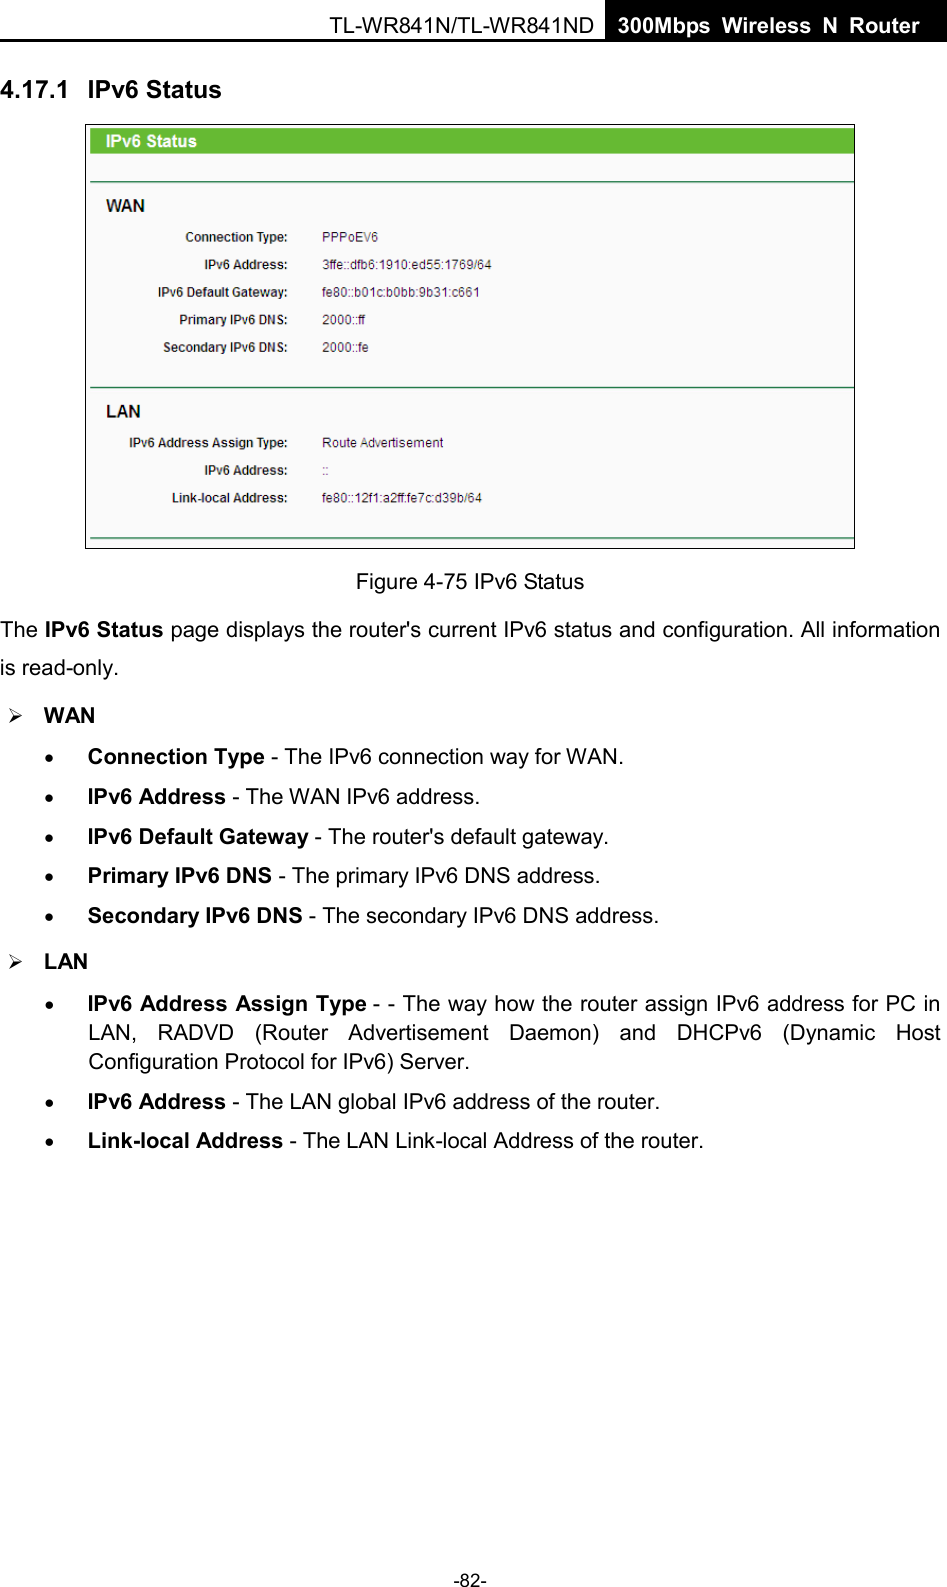  TL-WR841N/TL-WR841ND  300Mbps Wireless N Router    4.17.1 IPv6 Status  Figure 4-75 IPv6 Status The IPv6 Status page displays the router&apos;s current IPv6 status and configuration. All information is read-only.    WAN   • Connection Type - The IPv6 connection way for WAN. • IPv6 Address - The WAN IPv6 address. • IPv6 Default Gateway - The router&apos;s default gateway. • Primary IPv6 DNS - The primary IPv6 DNS address. • Secondary IPv6 DNS - The secondary IPv6 DNS address.  LAN • IPv6 Address Assign Type - - The way how the router assign IPv6 address for PC in LAN, RADVD (Router Advertisement Daemon) and DHCPv6 (Dynamic Host Configuration Protocol for IPv6) Server. • IPv6 Address - The LAN global IPv6 address of the router. • Link-local Address - The LAN Link-local Address of the router. -82- 